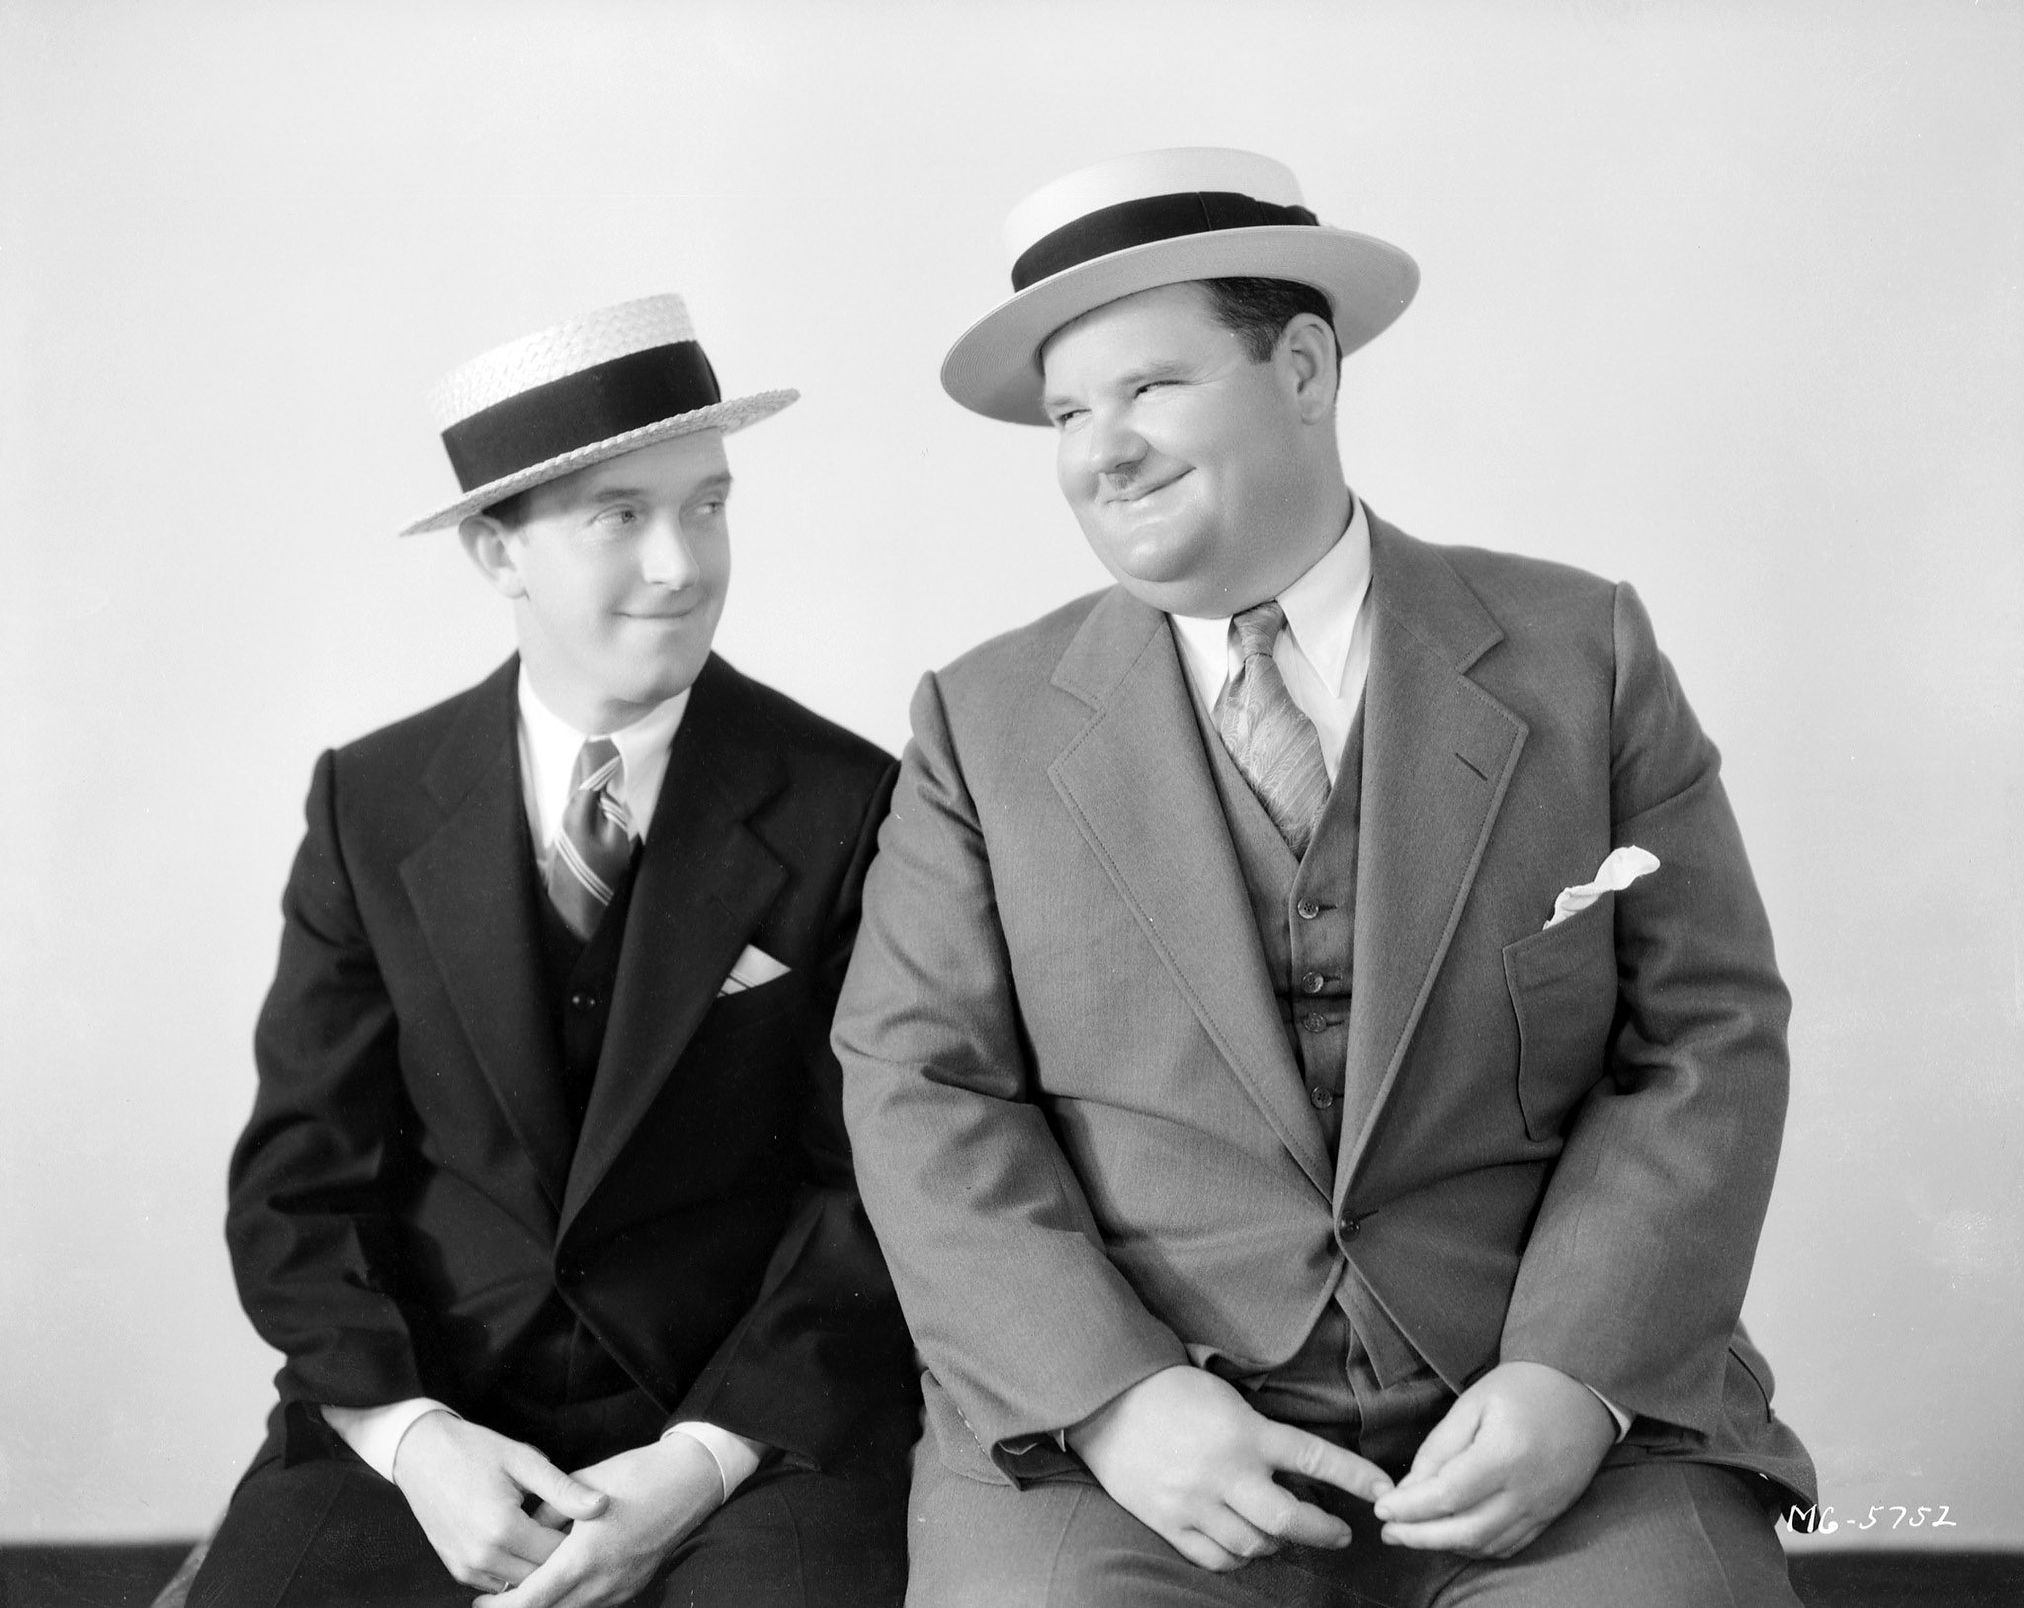 Stan Laurel and Oliver Hardy, wearing straw boaters instead of their trademark bowler hats, circa 1930.